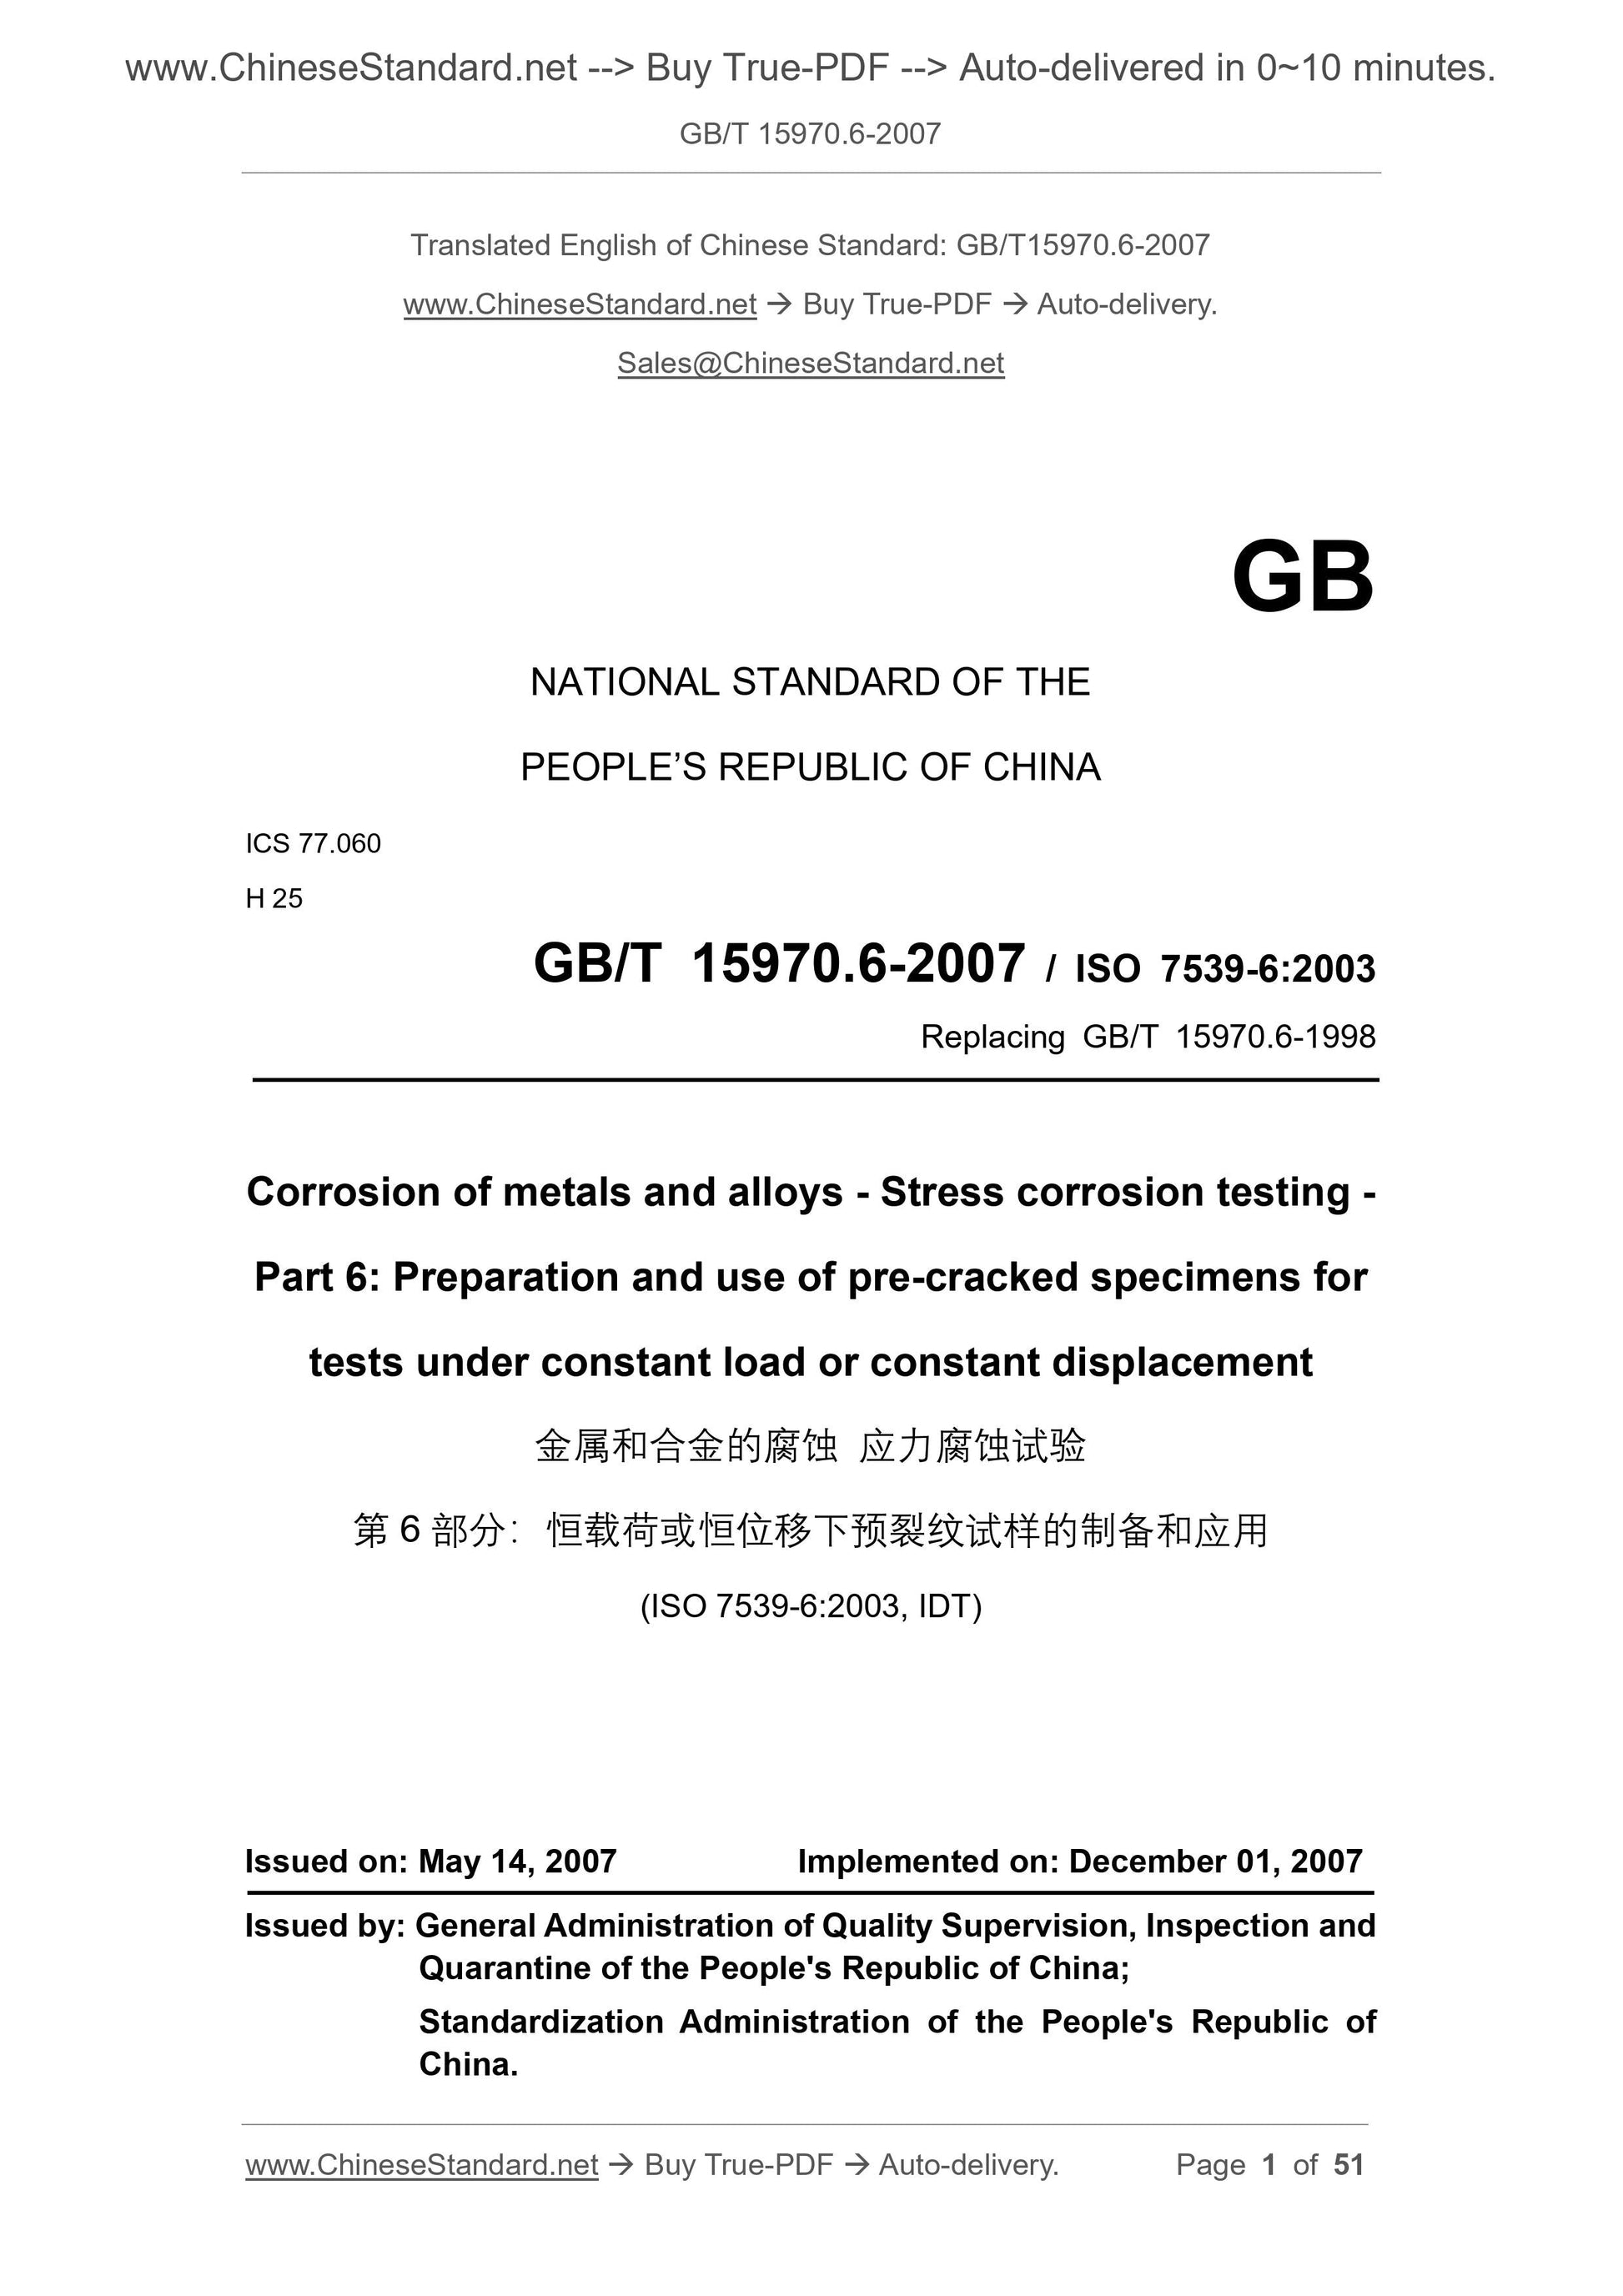 GB/T 15970.6-2007 Page 1